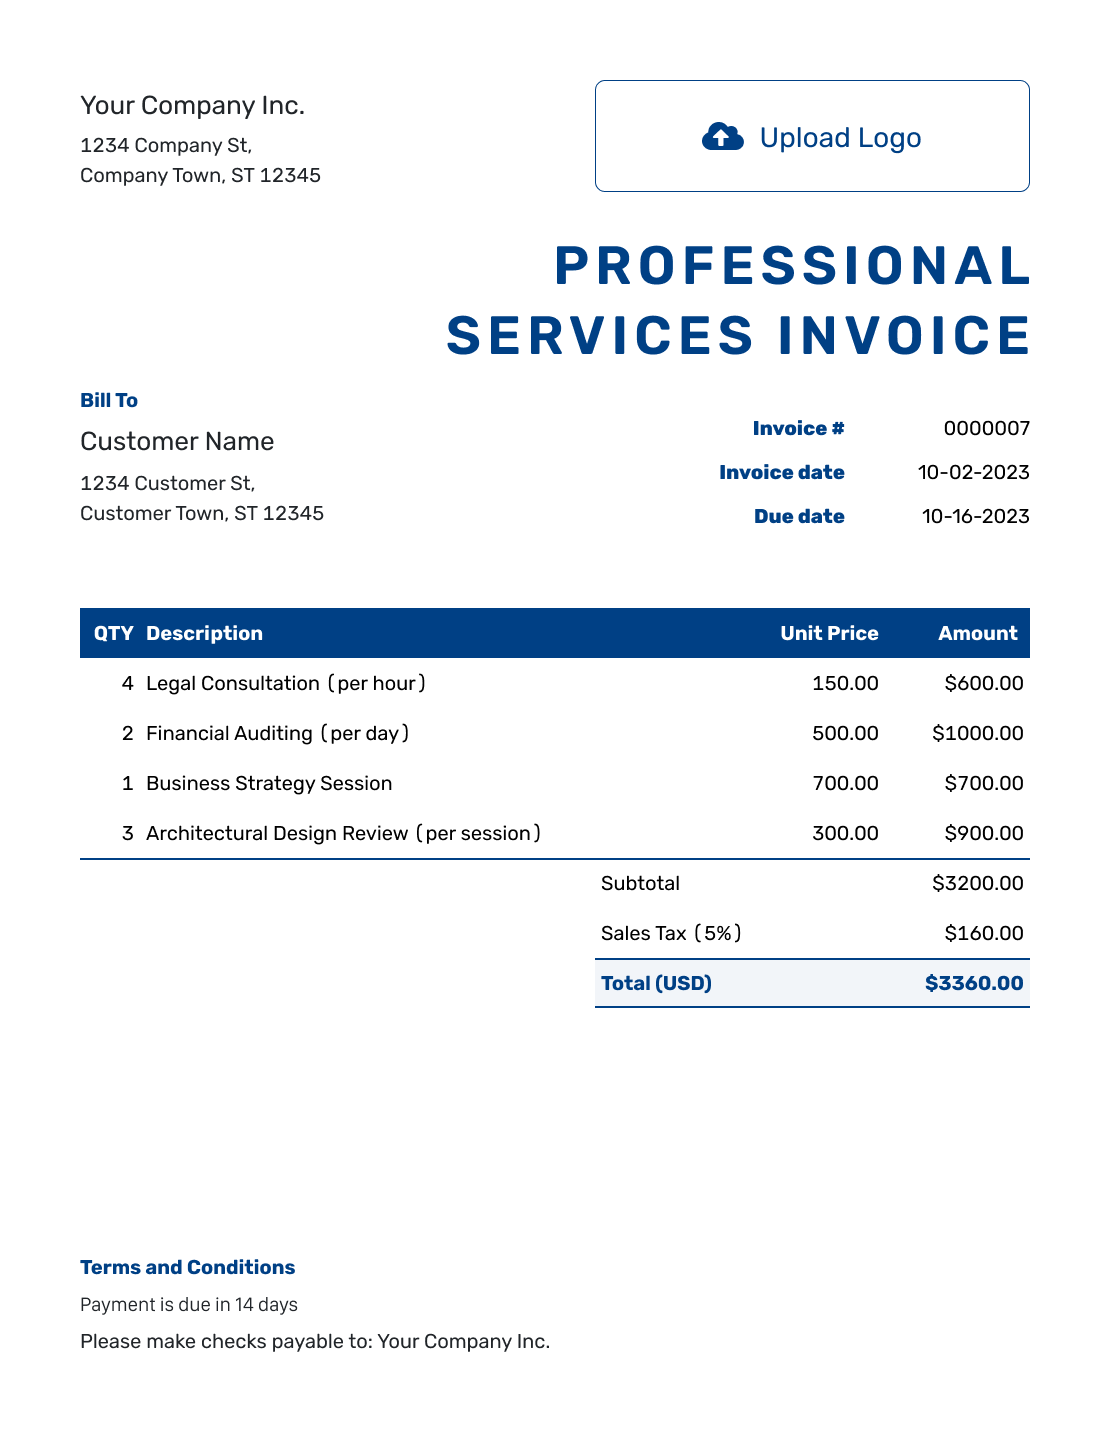 Sample Professional Services Invoice Template